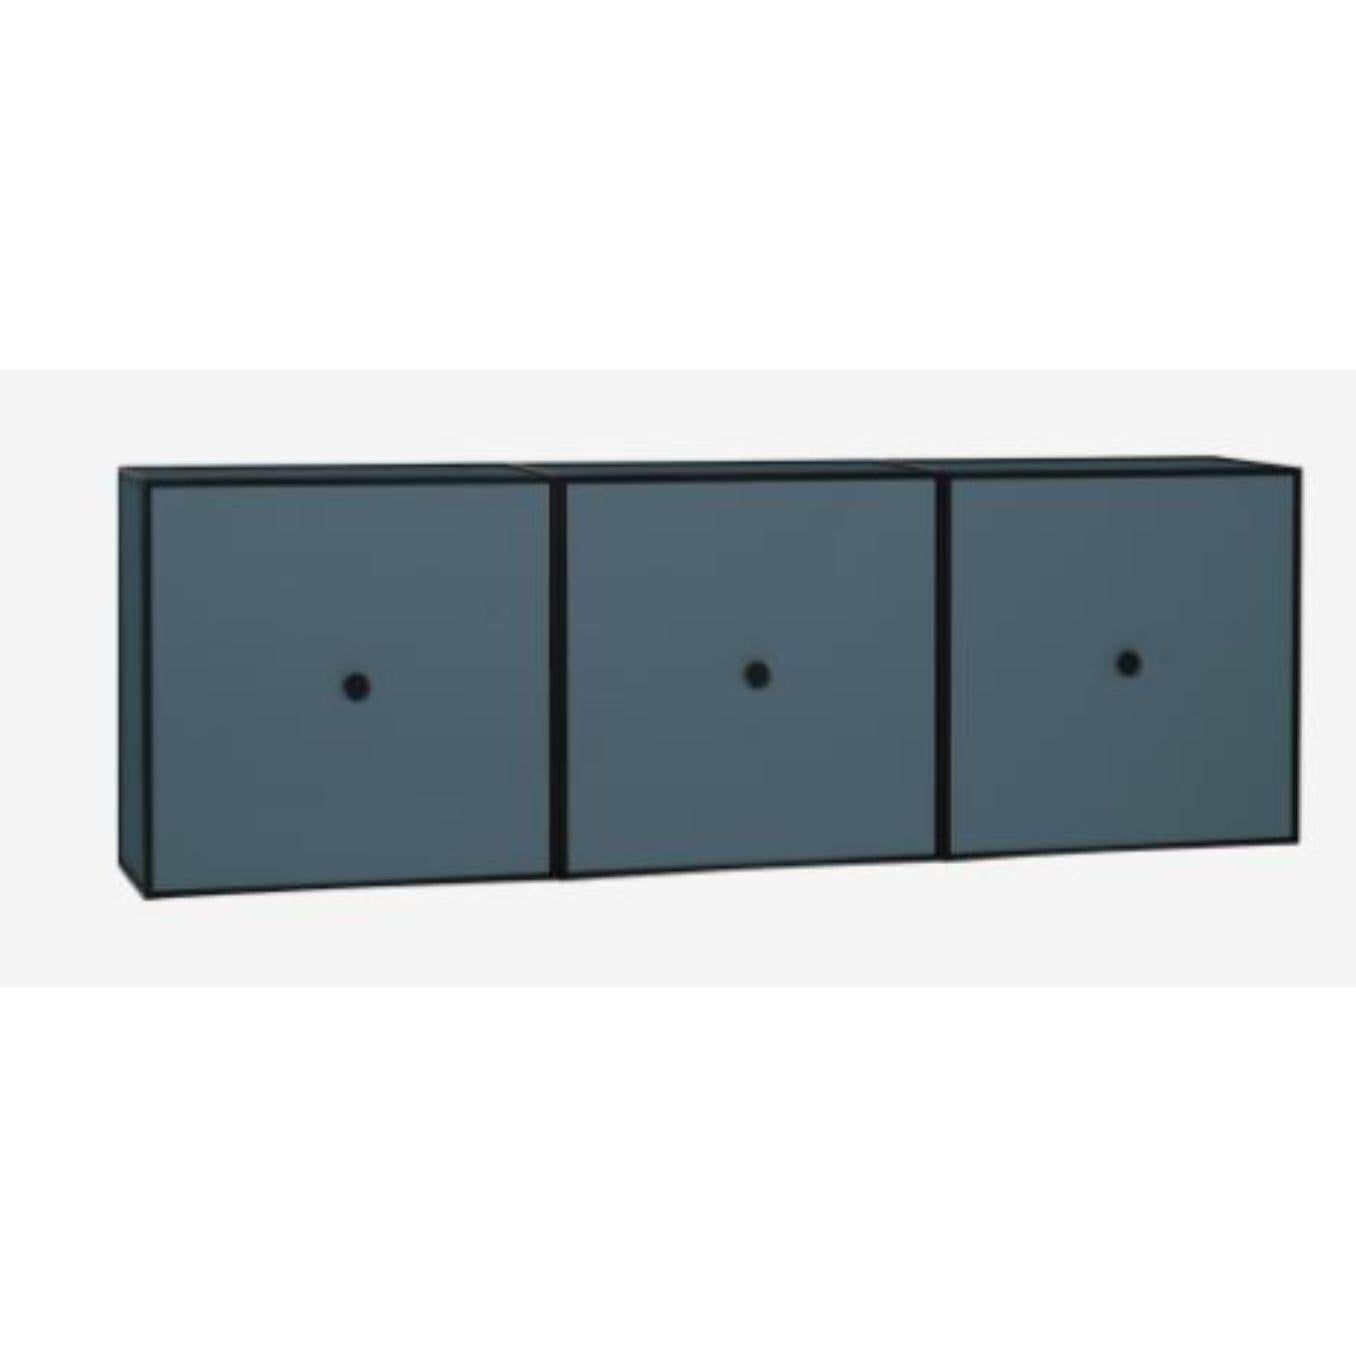 42 Fjord frame view box by Lassen.
Dimensions: D 126 x W 21 x H 42 cm. 
Materials: Finér, Melamin, Melamine, Metal, Veneer
Also available in different colors and dimensions. 
Weight: 22.80 Kg

By Lassen is a Danish design brand focused on